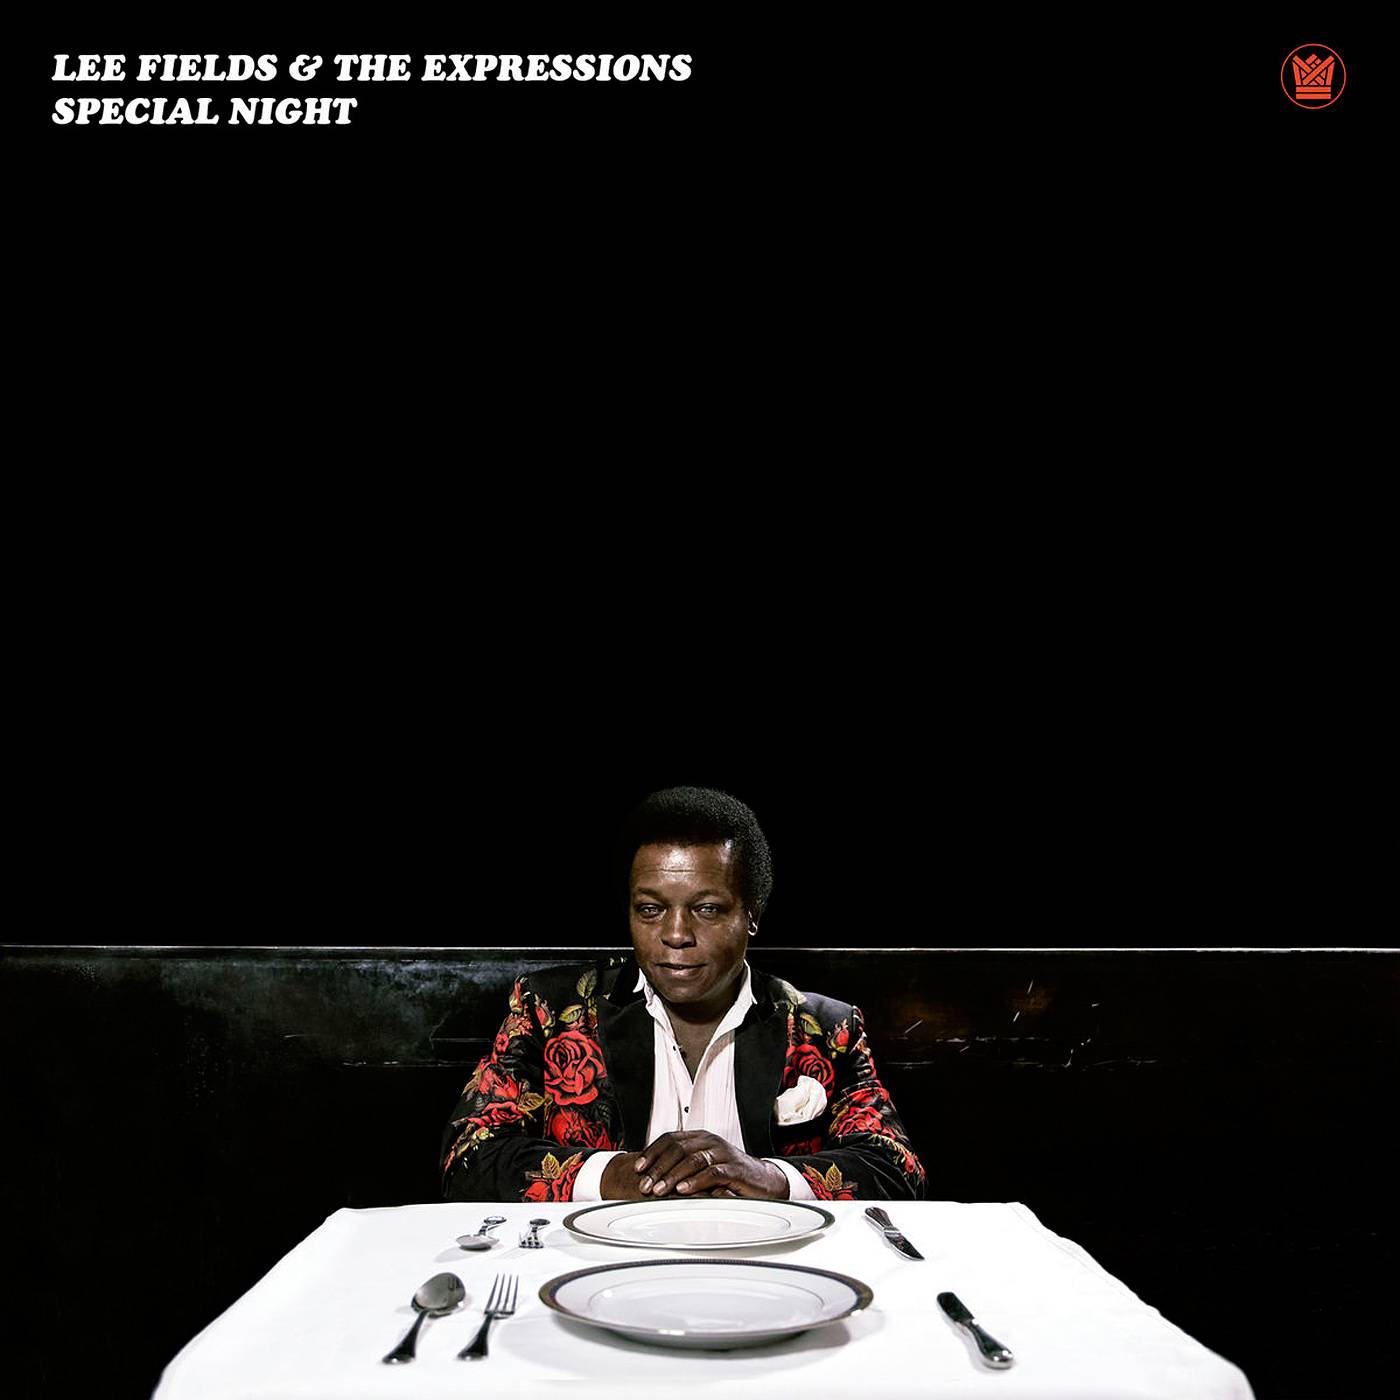 Lee Fields & The Expressions - Special Night (2016) [FLAC 24bit/44,1kHz]